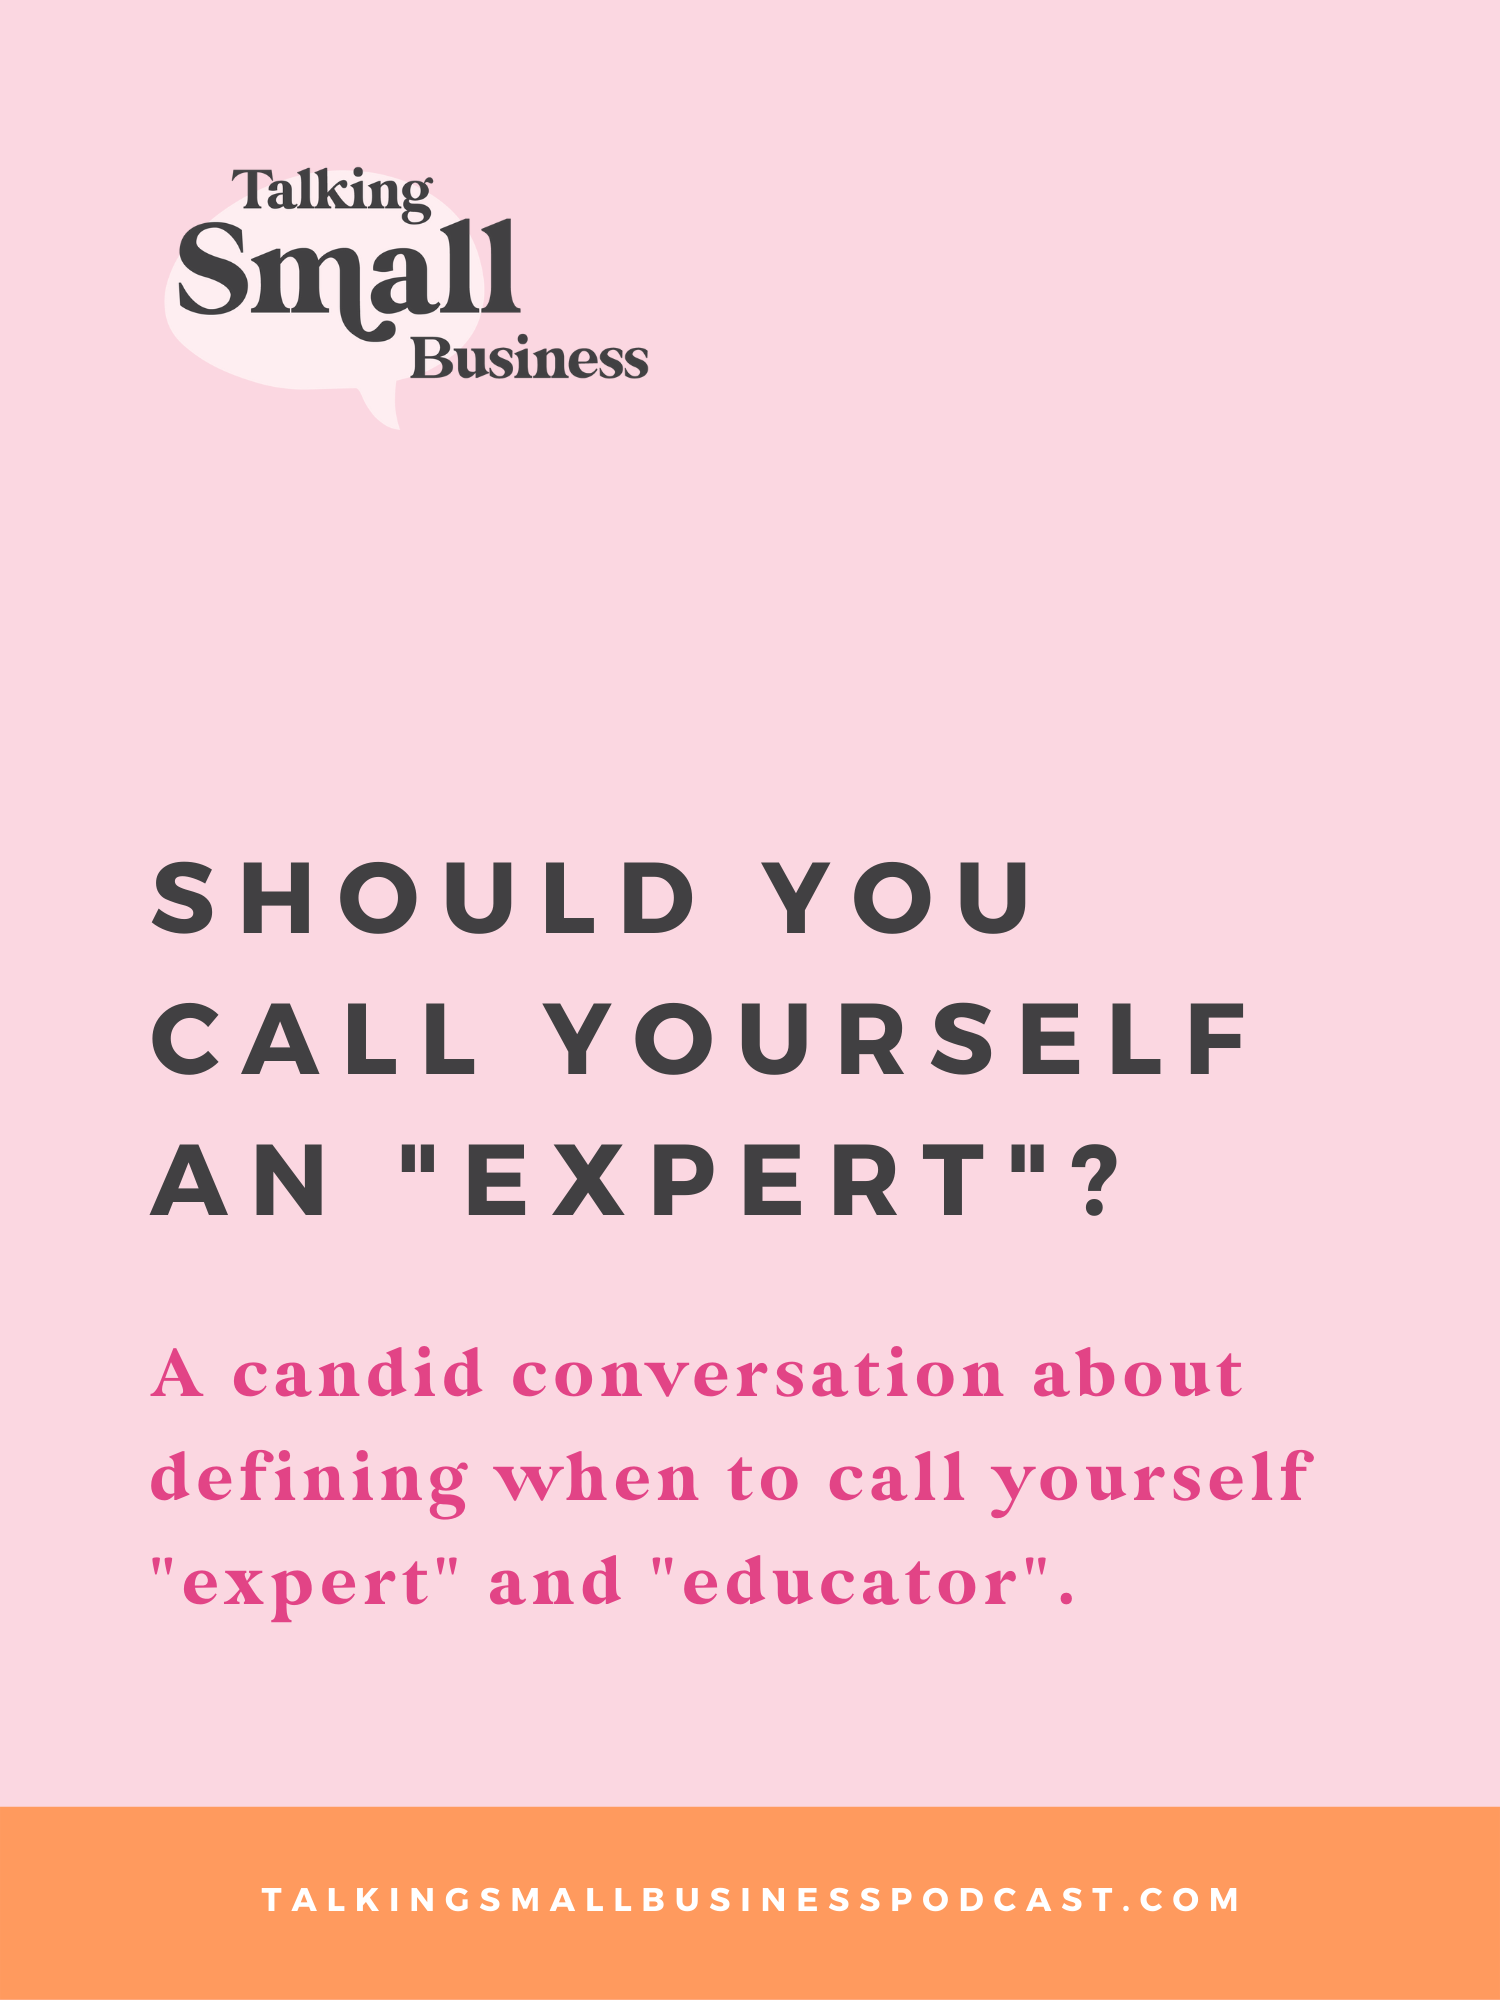 Should You Call Yourself an Expert?: A candid conversation about being an expert and educator as a business owner